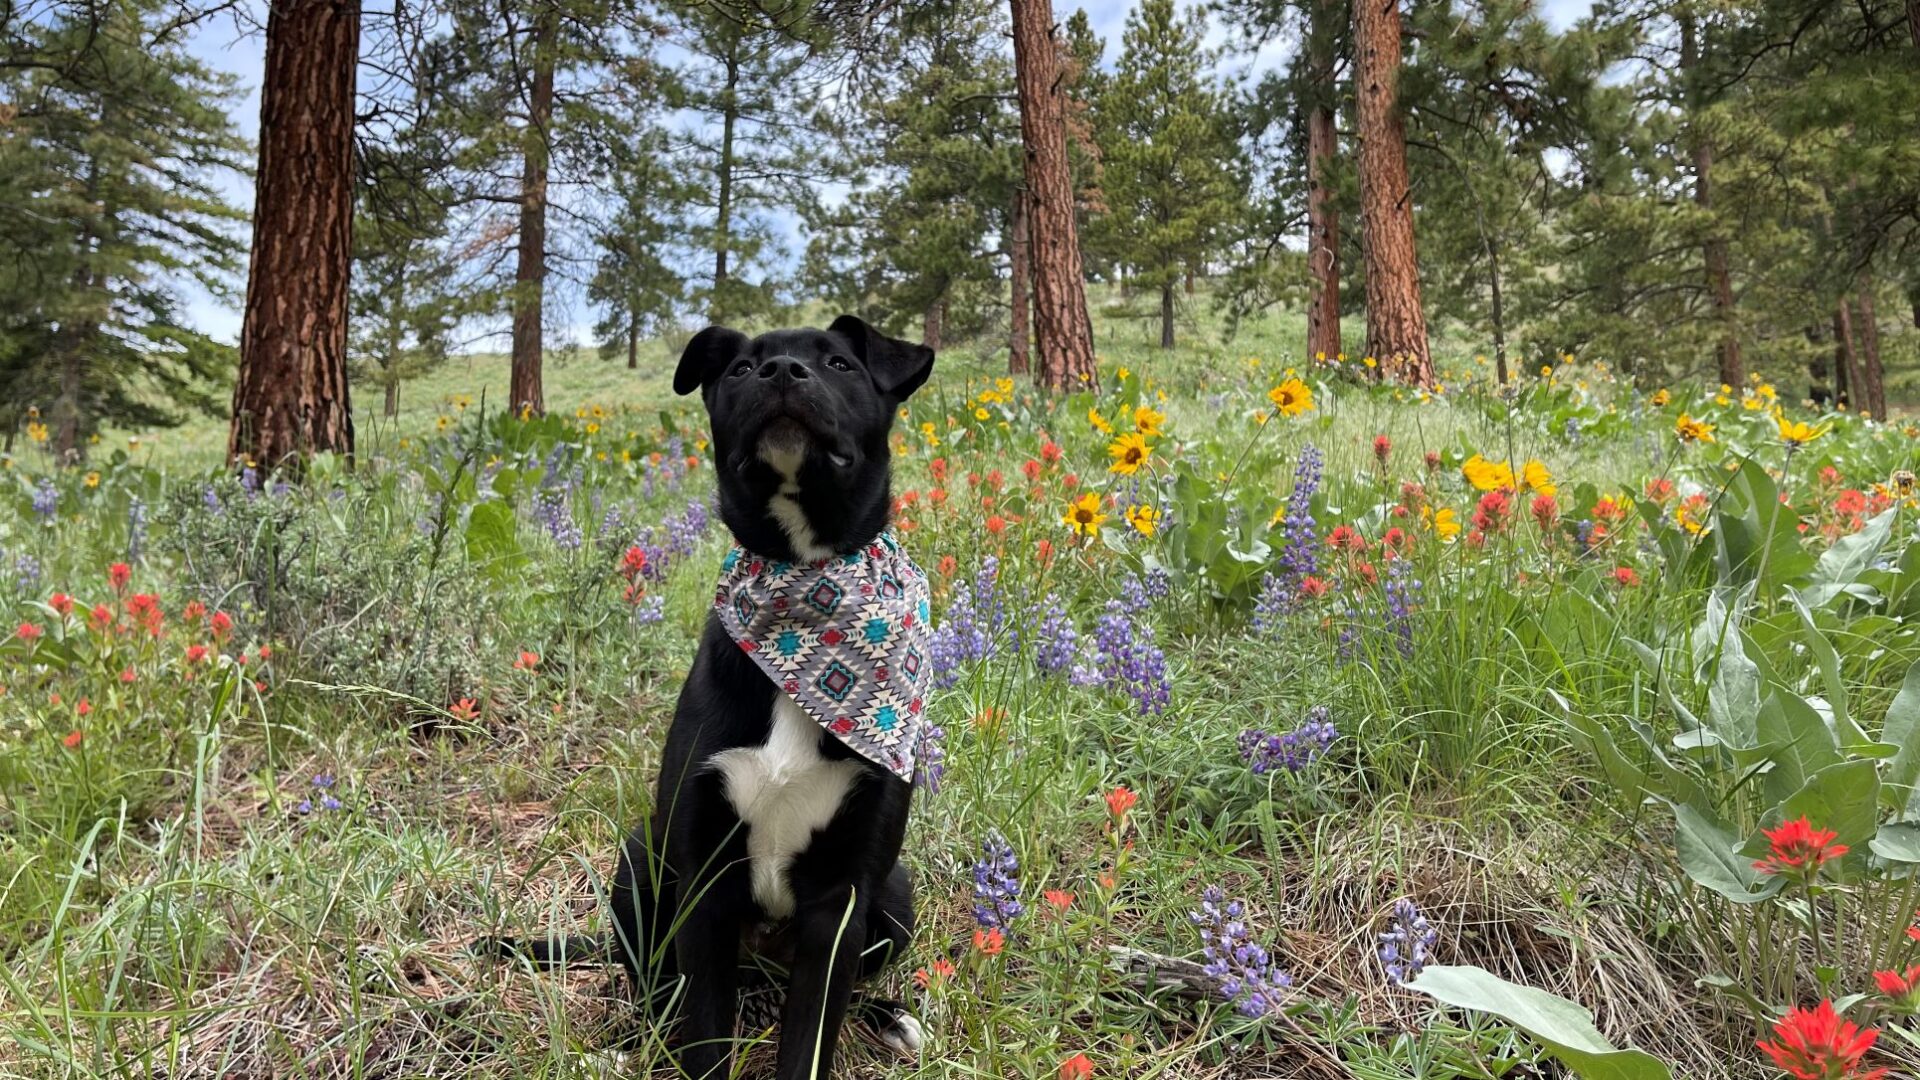 Black dog with white belly patch, wearing a doggy bandana, sitting and looing up at the camera. In the background is a forest of Ponderosa pine trees and immediately behind the dog is a patch wildflowers, colored purple, red, and yellow.